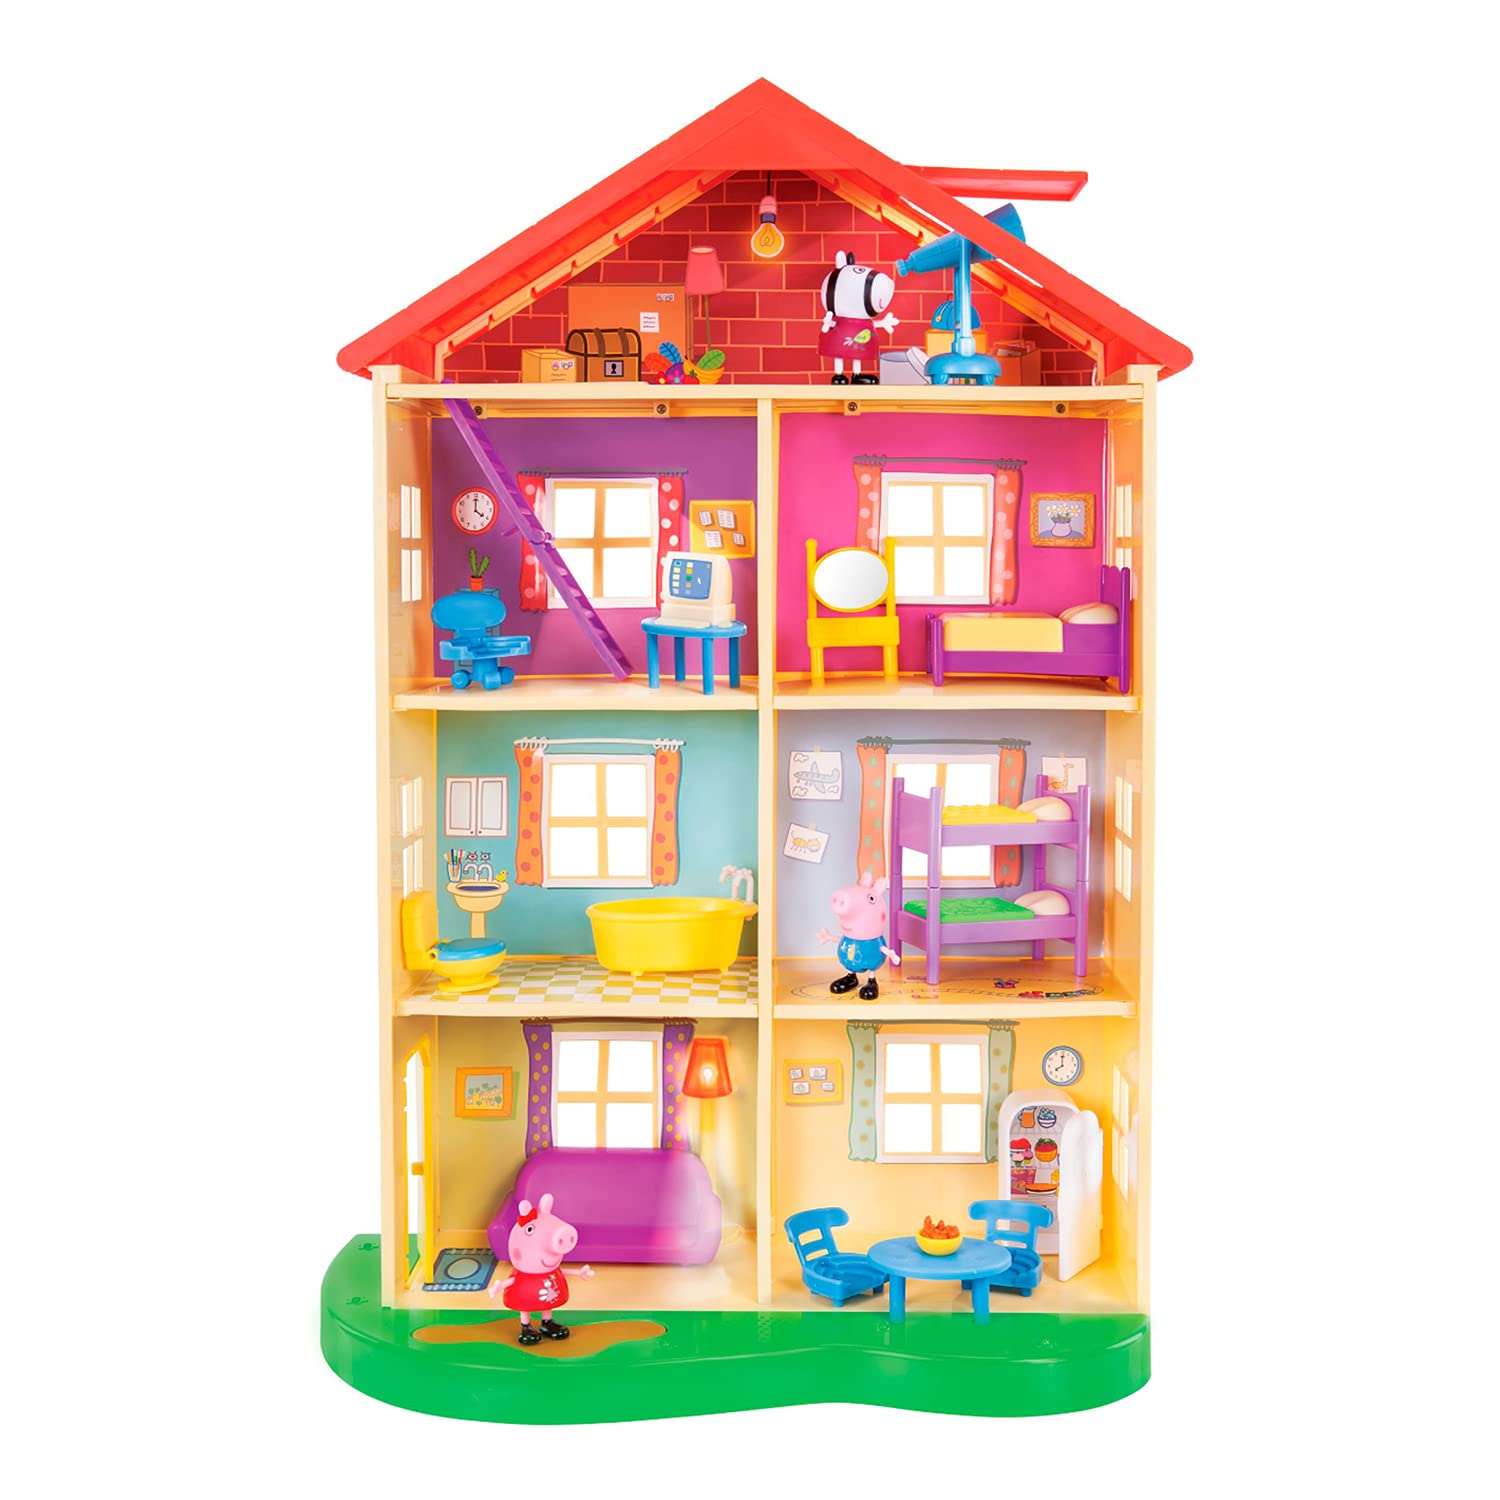 Peppa Pig 22-Inch Family Home Interactive Feature Playset with Peppa Pig, George, Zoe Zebra, 13 Accessories, 7 Rooms, Lights, Sounds, and Phrases